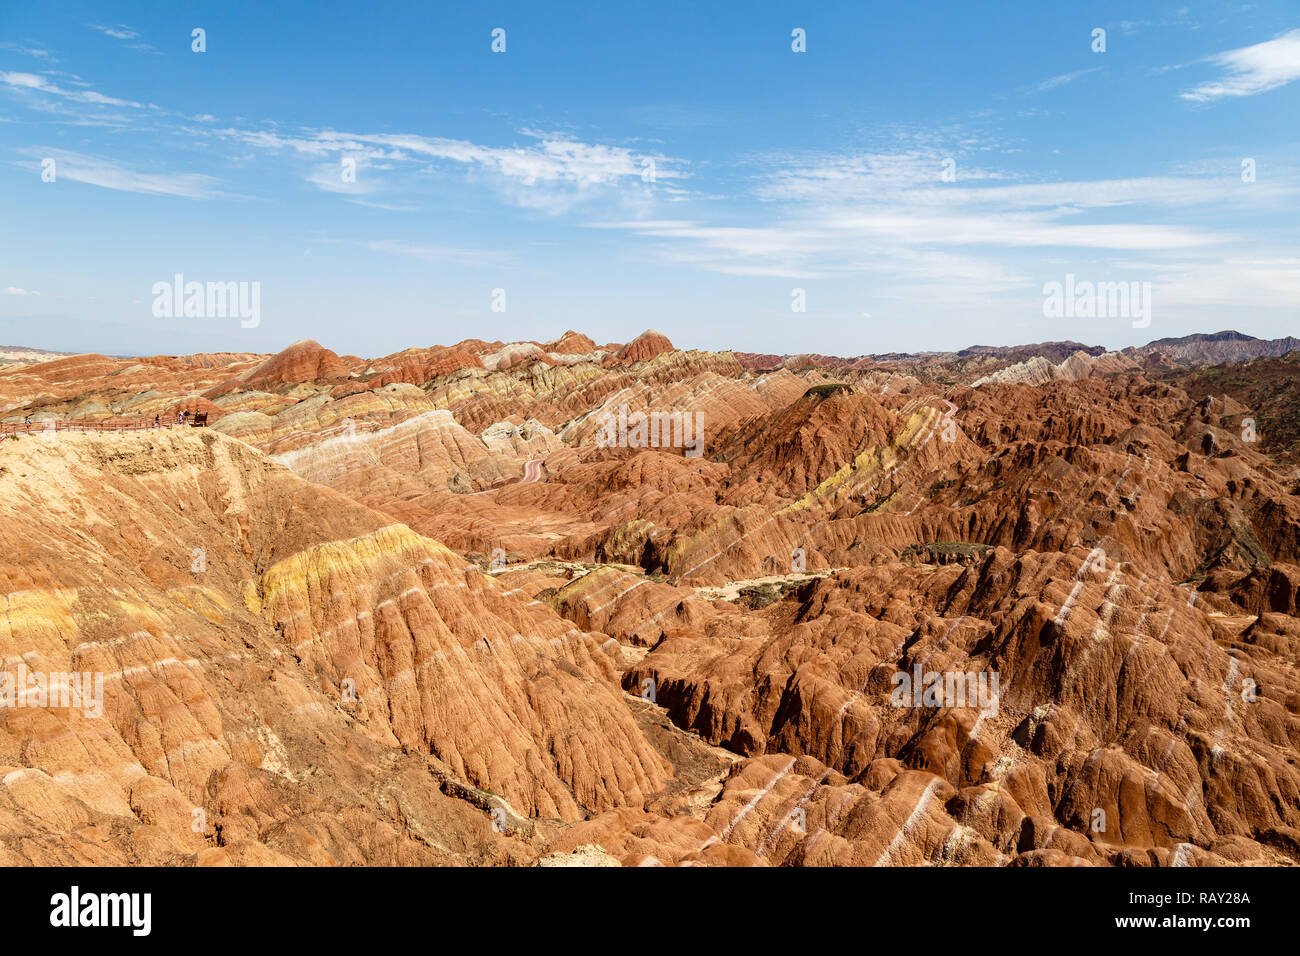 Danxia Feng, or Colored Rainbow Mountains, in Zhangye, Gansu, China seen from the Colorful Sea of Clouds Observation deck Stock Photo